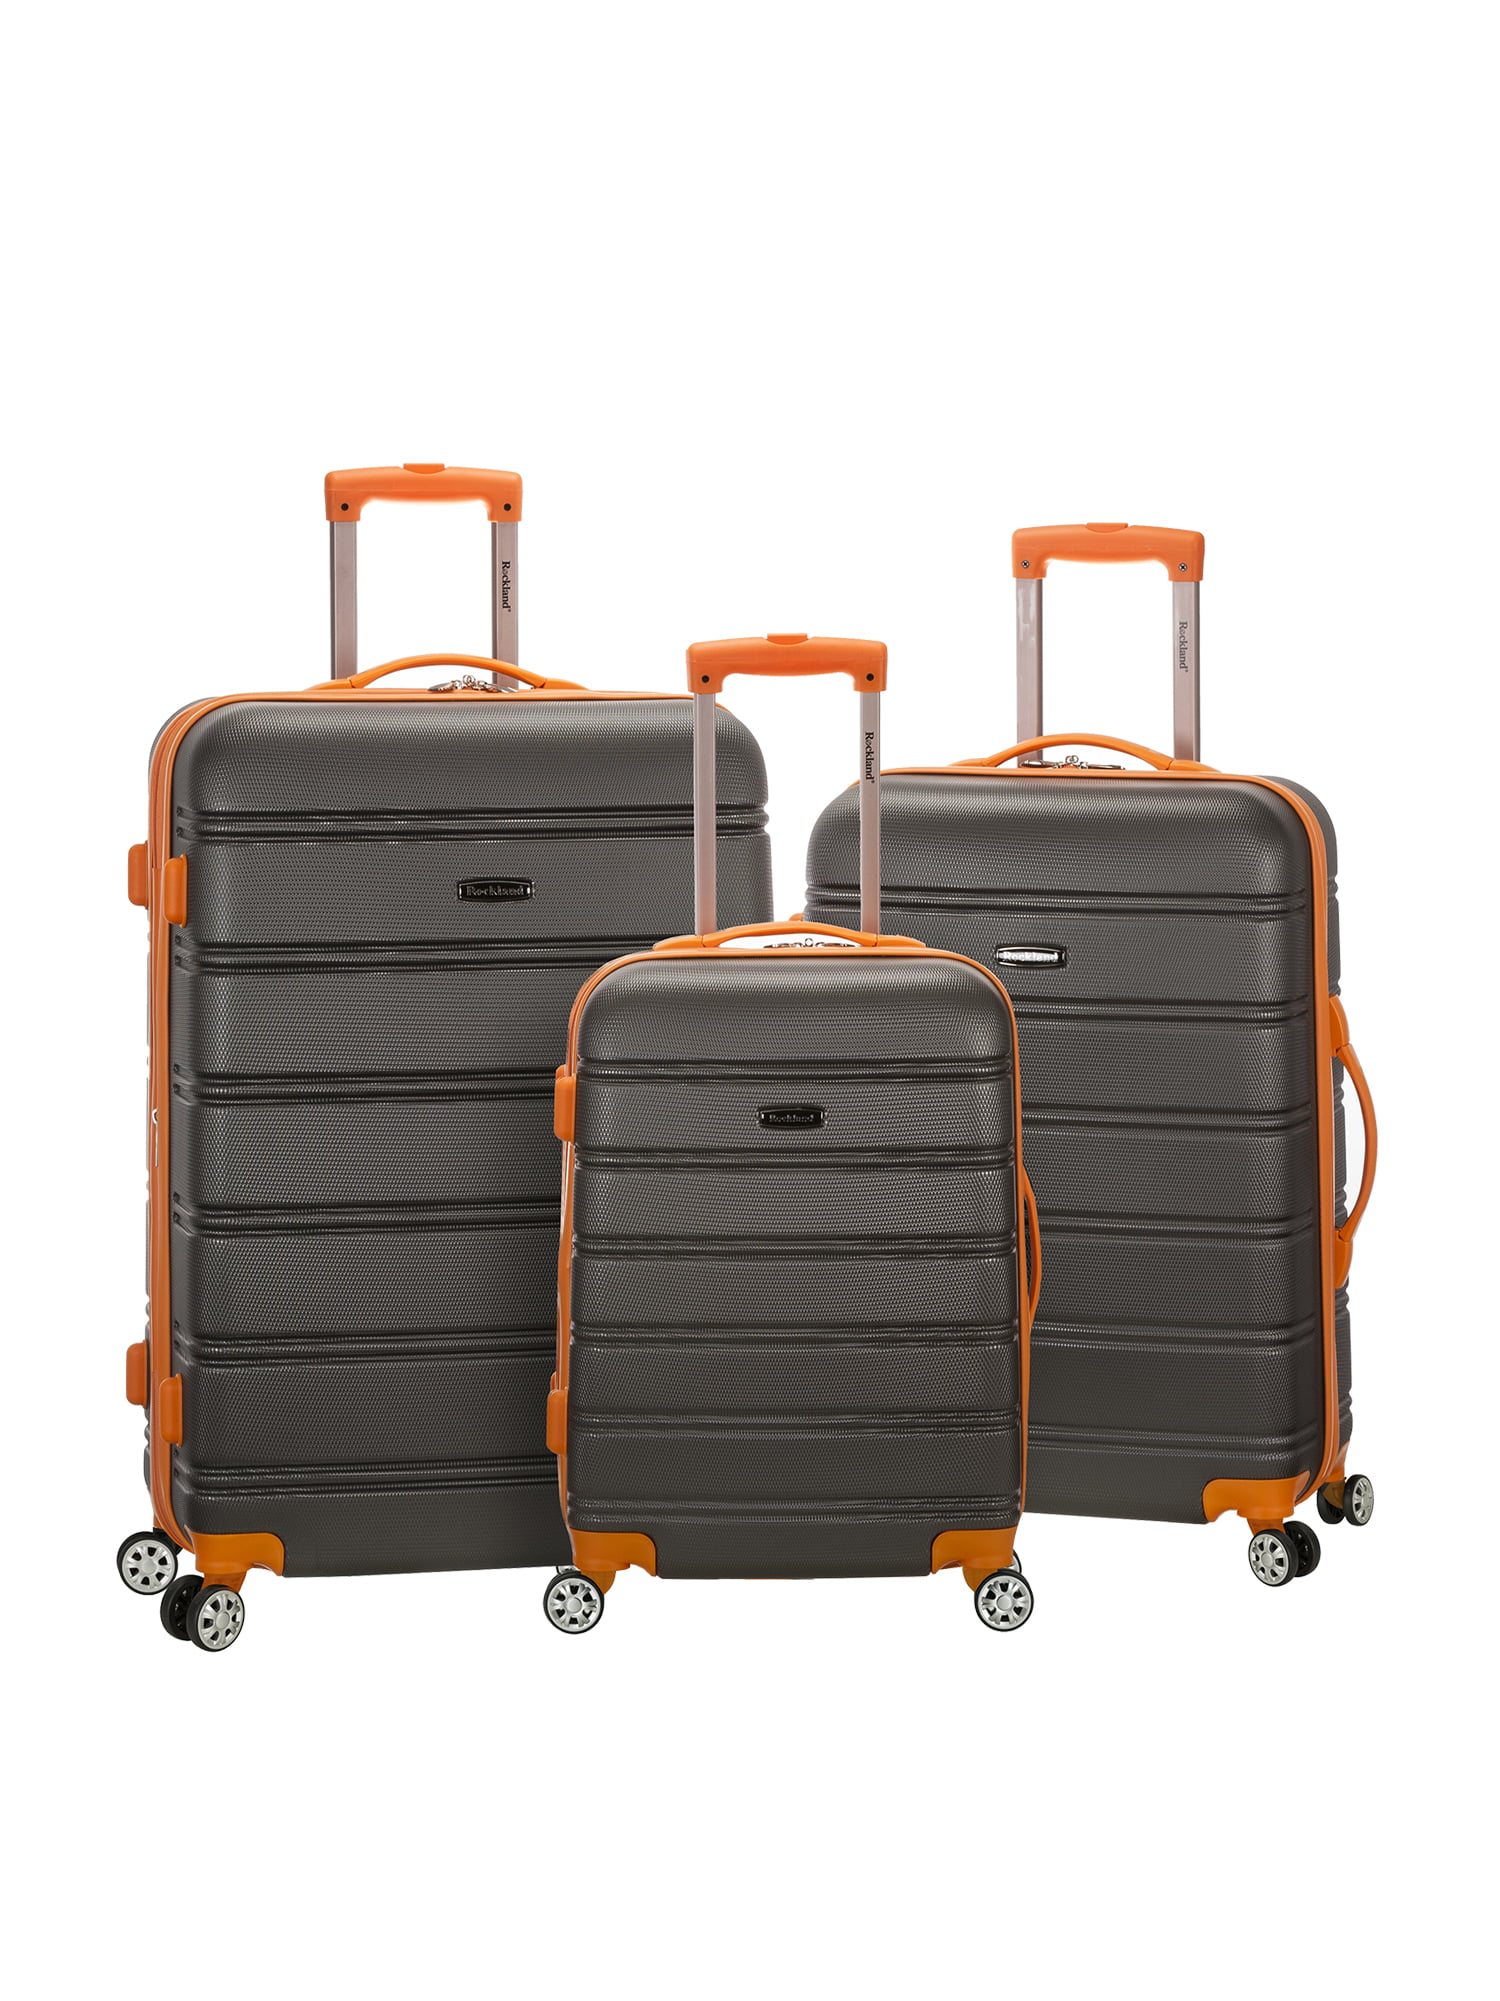 Rockland Luggage Melbourne 3-Piece Set One Size Champagne